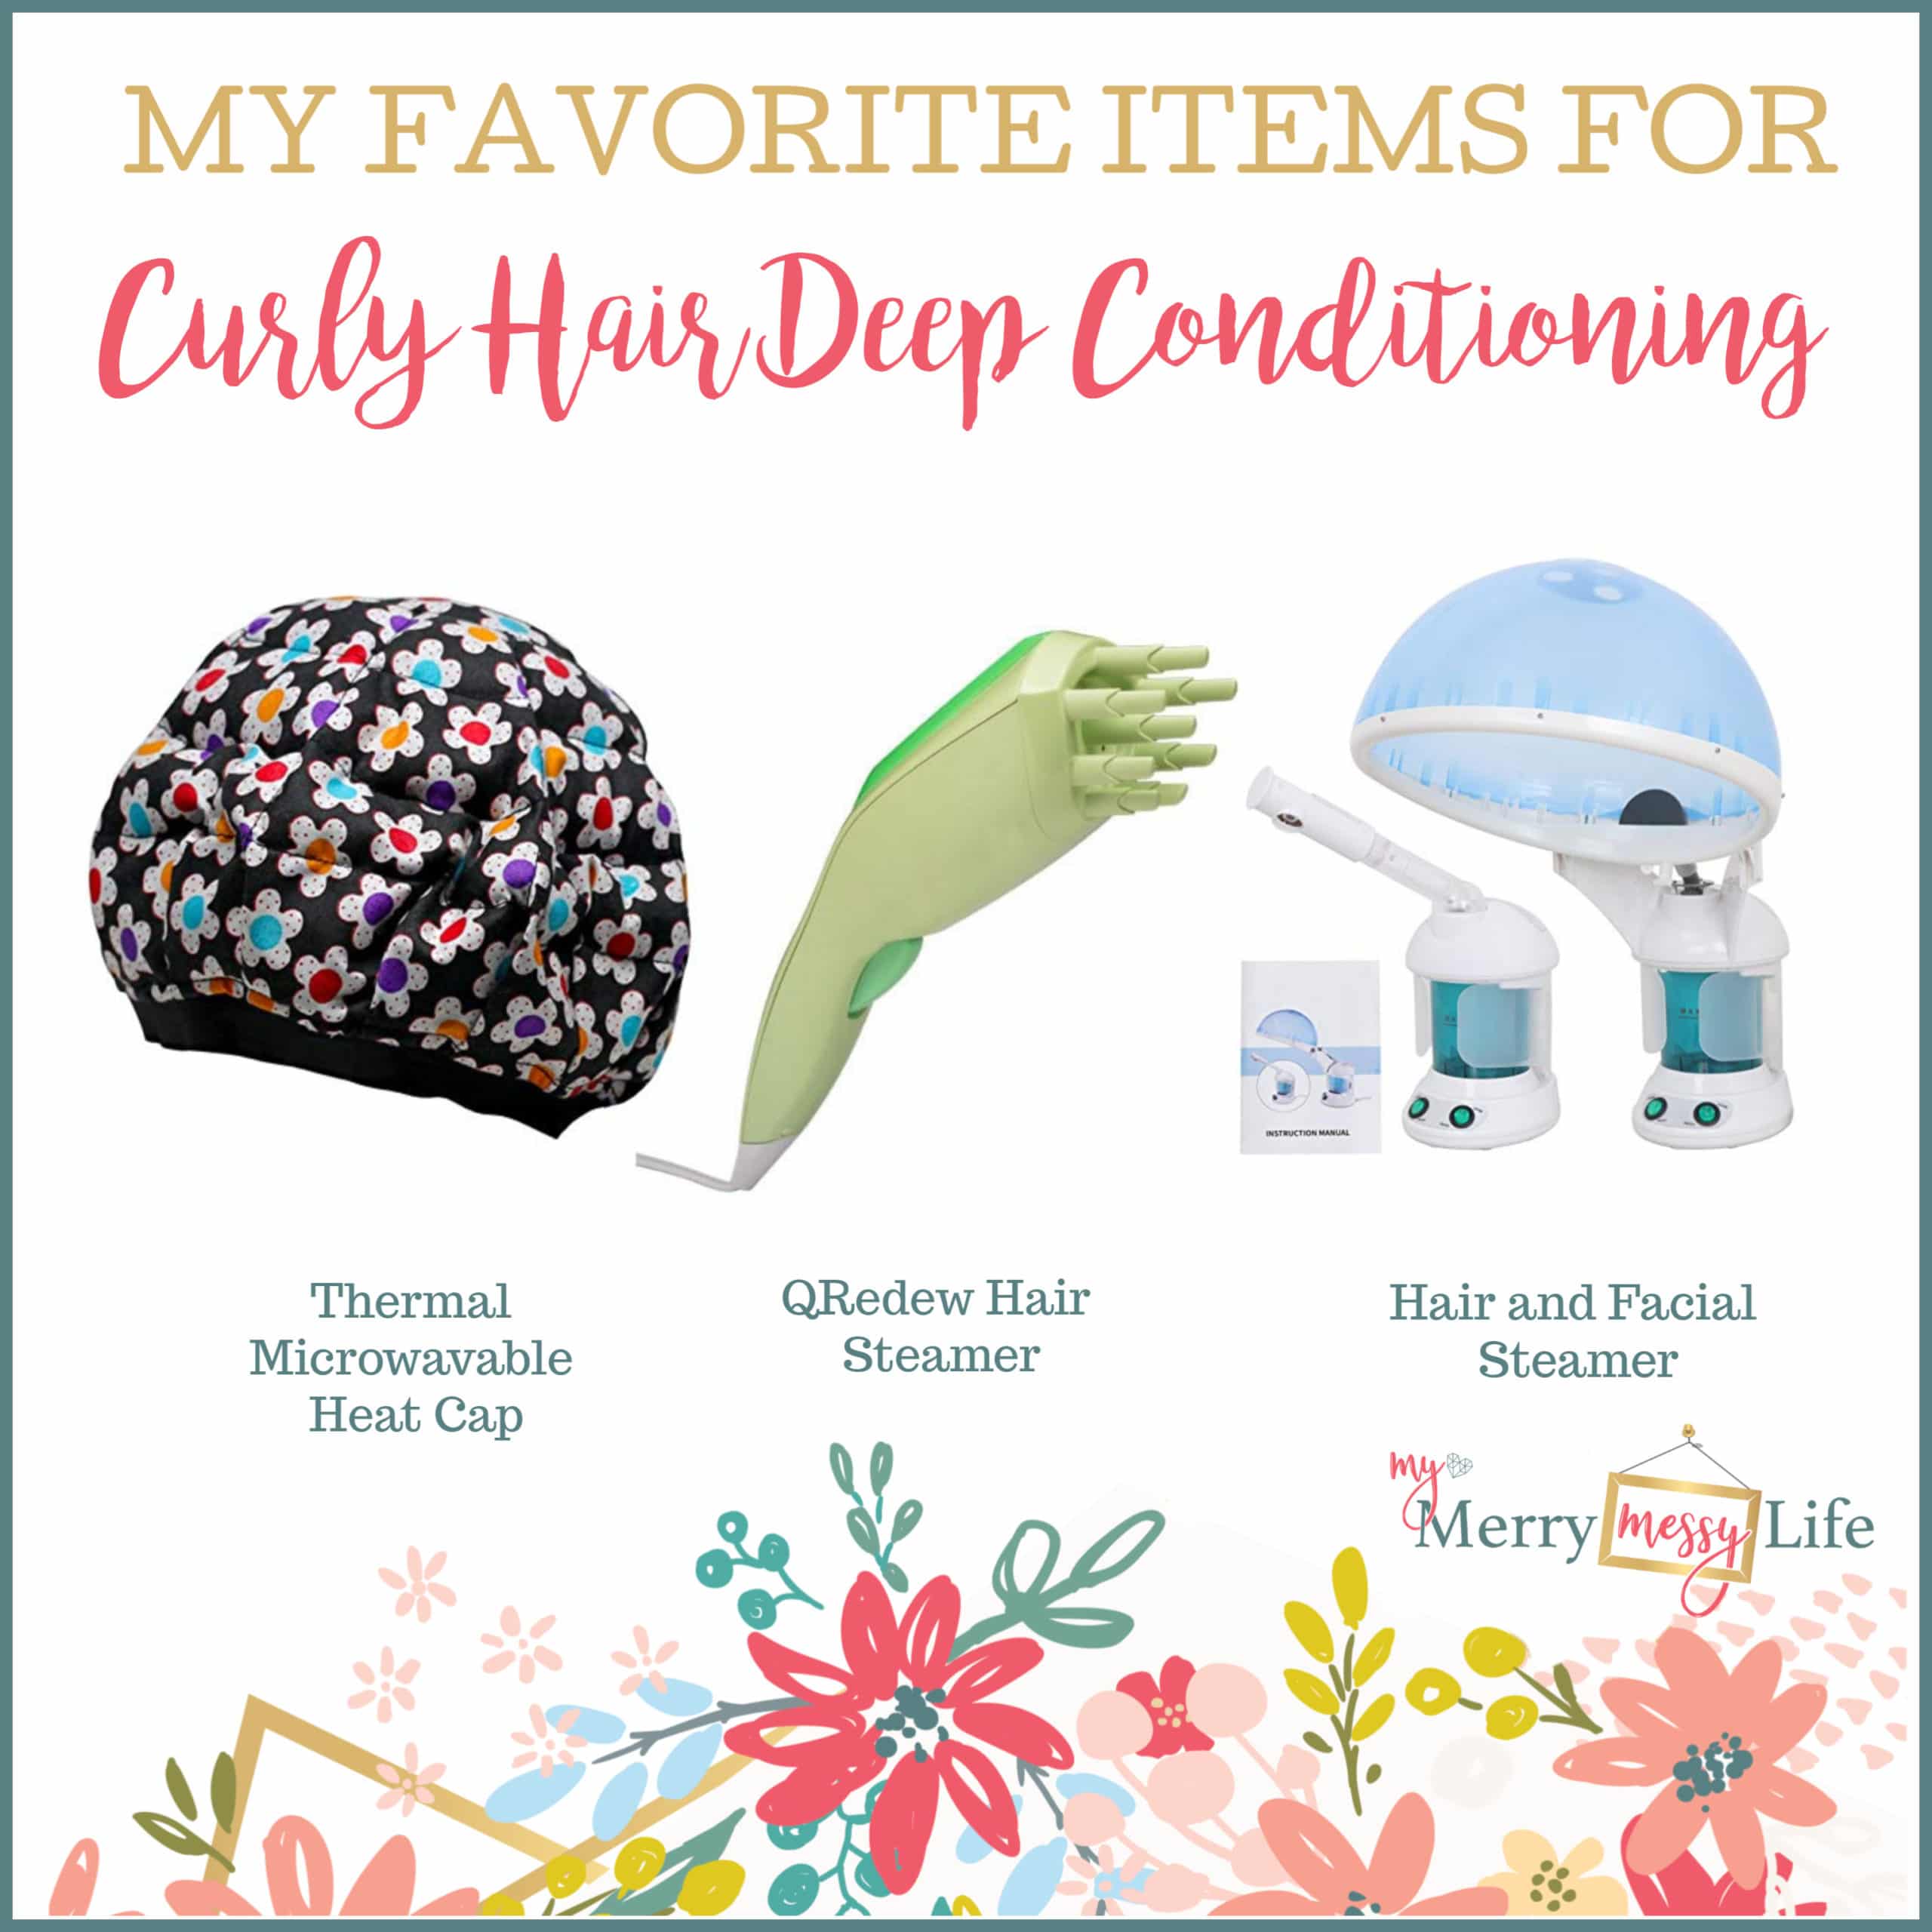 My Favorite Items for Curly Hair Deep Conditioning - a thermal, microwaveable heat cap, a QRedew Hair Steamer, and a Hair and Facial Steamer